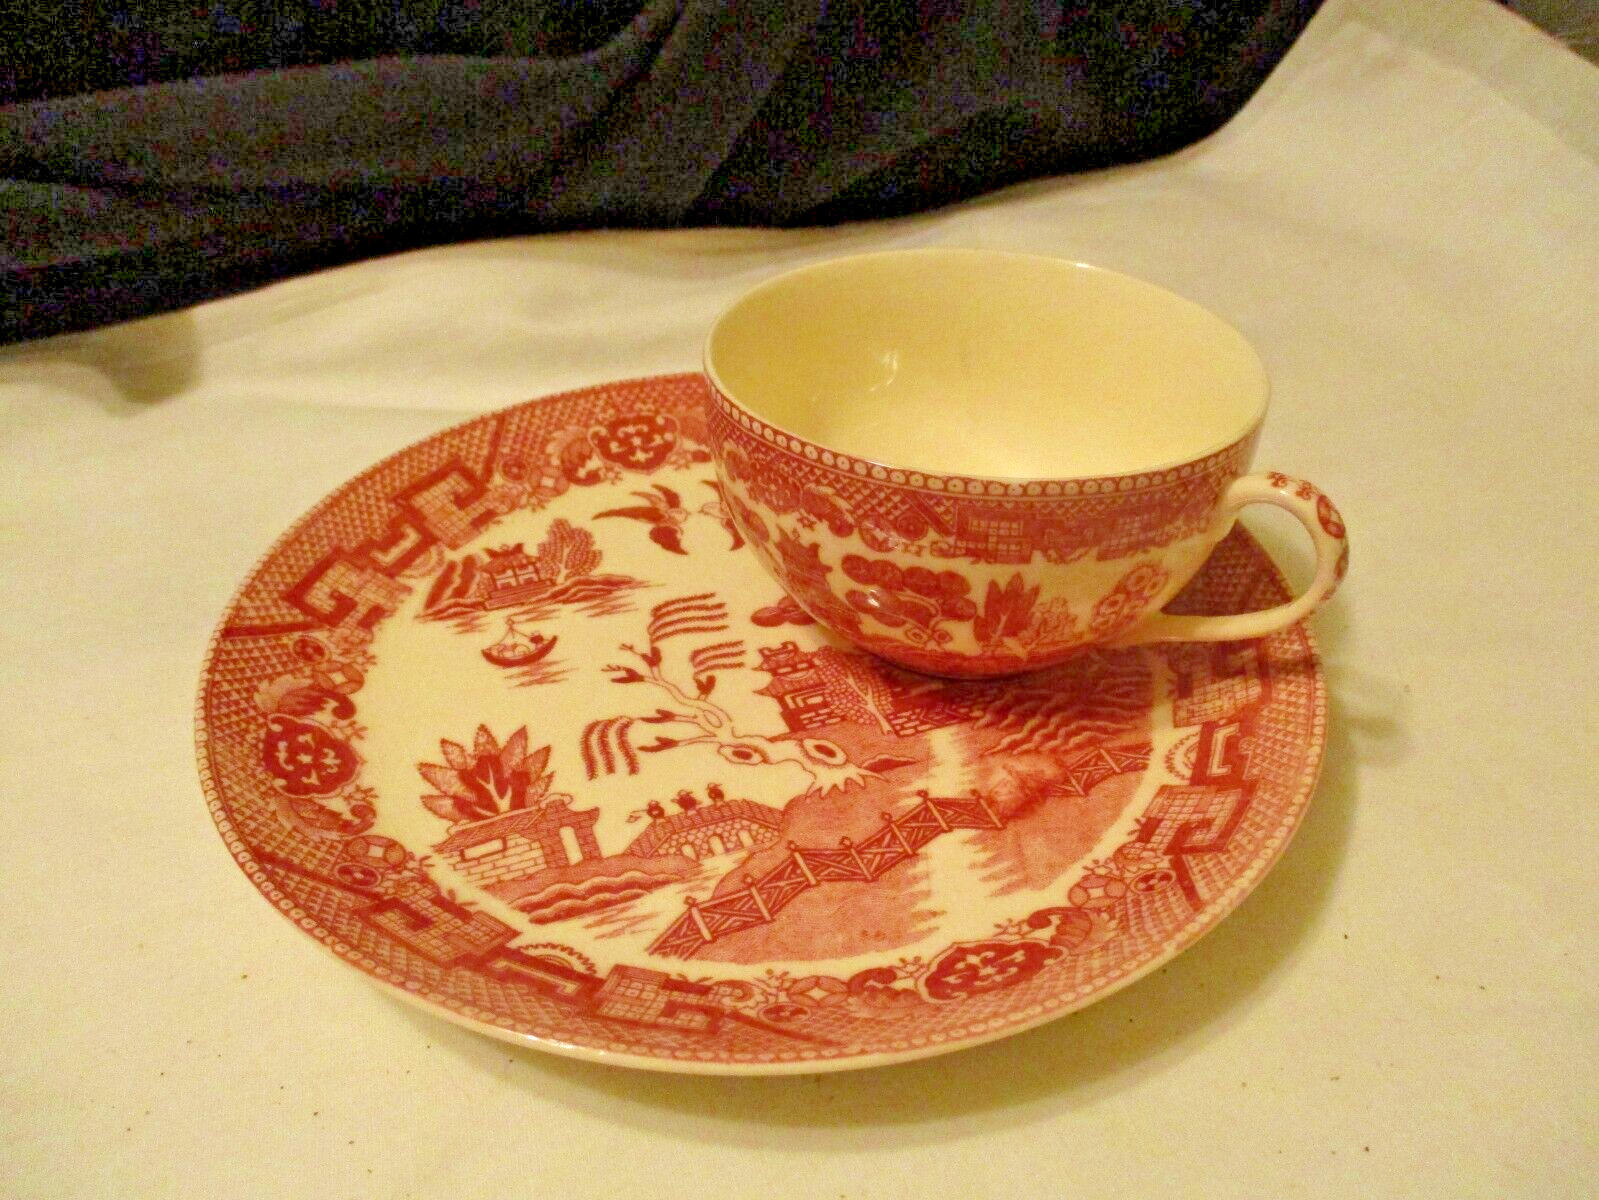 Nasco Japan Red Willow Snack Luncheon Plate and Cup